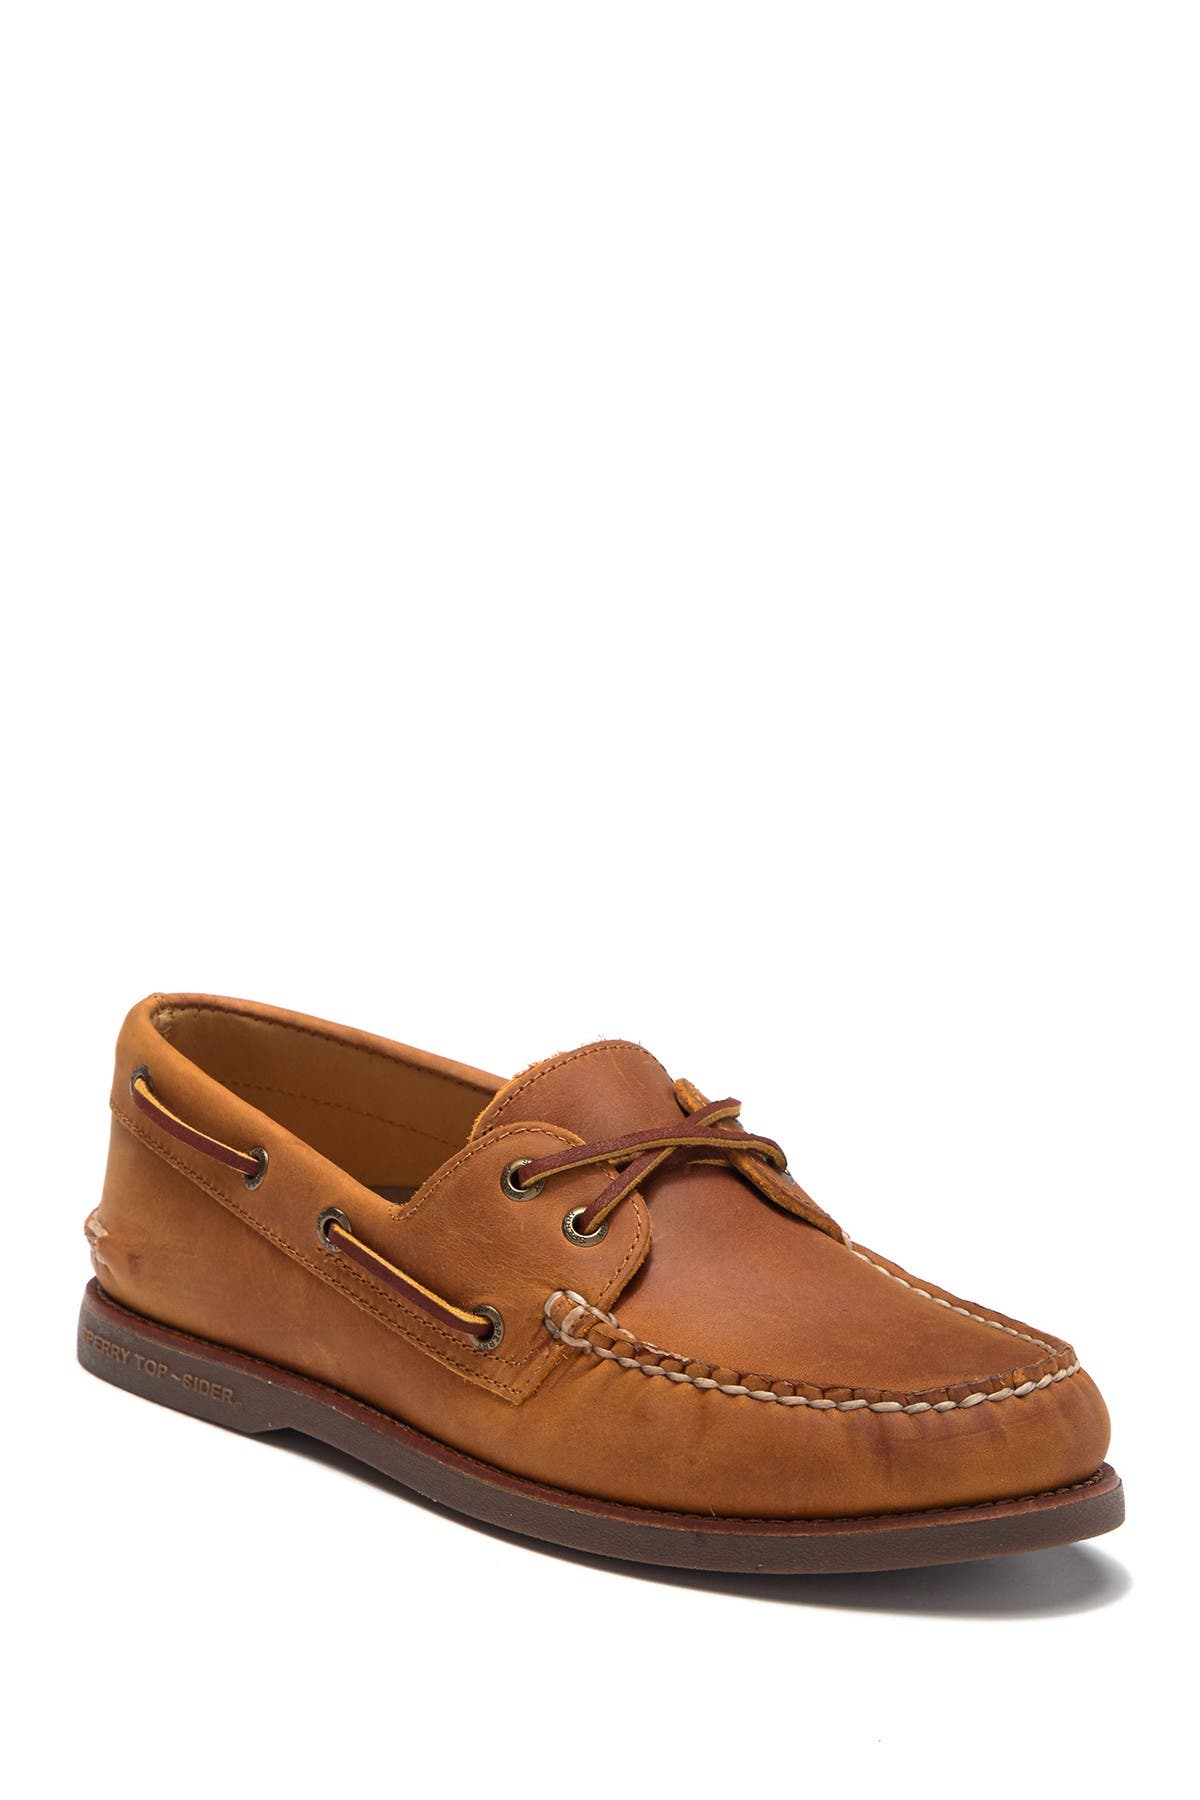 sperry 10.5 wide